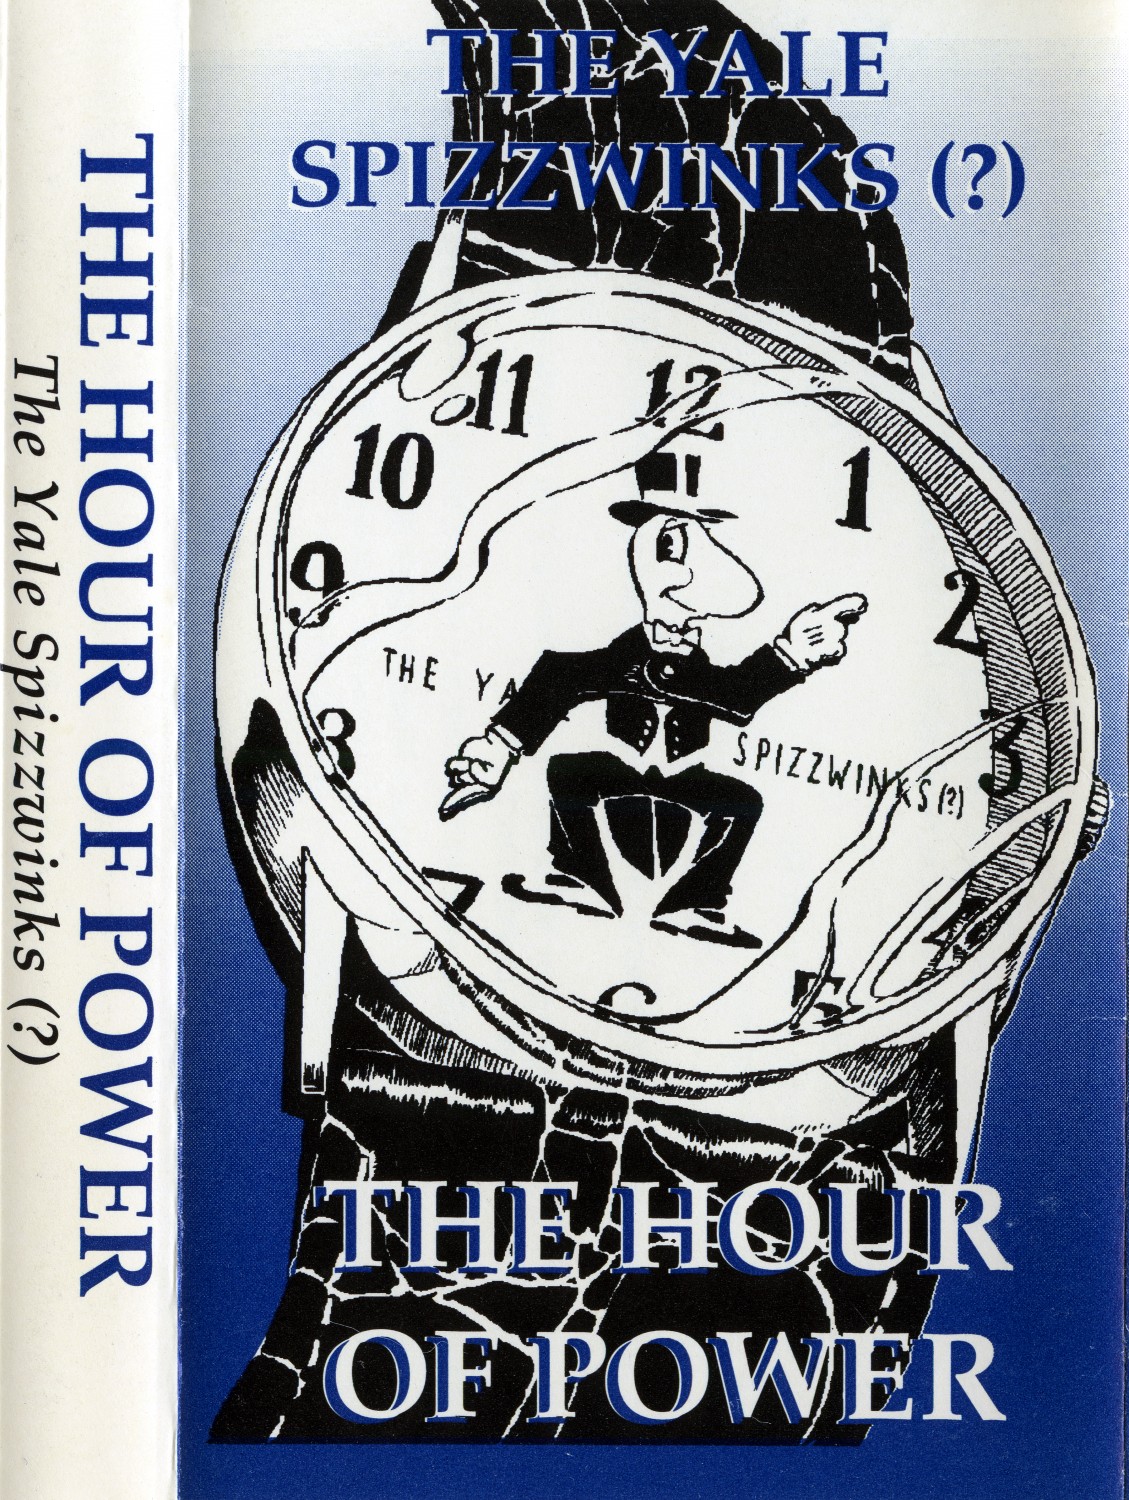 1991 The Hour Of Power - outside spread